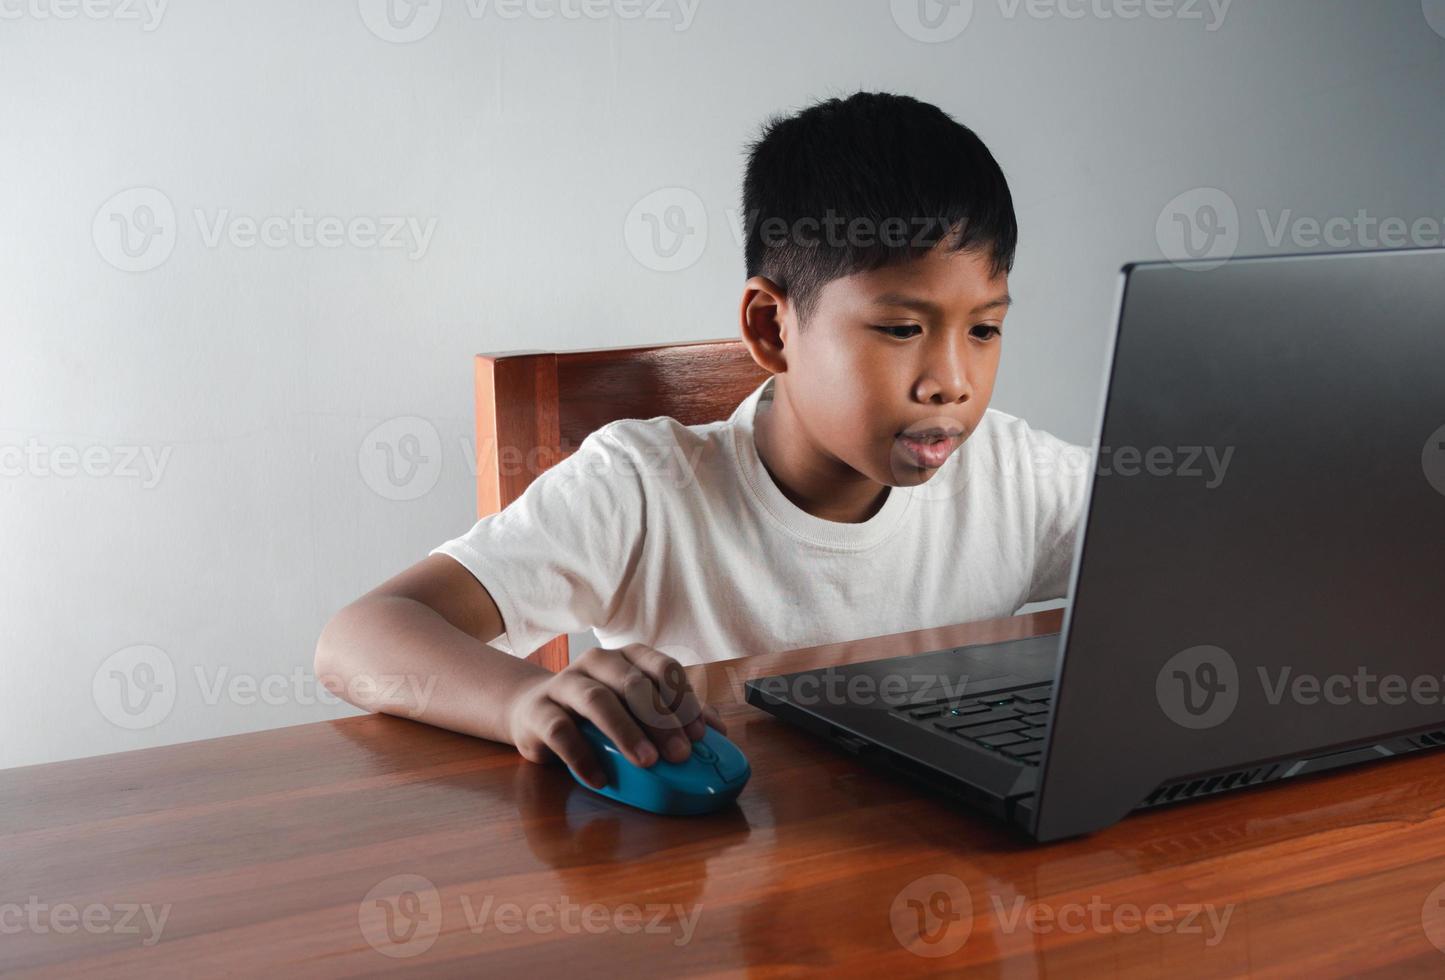 Close up The boy sits staring at the laptop and his hand is holding the mouse. educational concept, educational information search, copy space photo